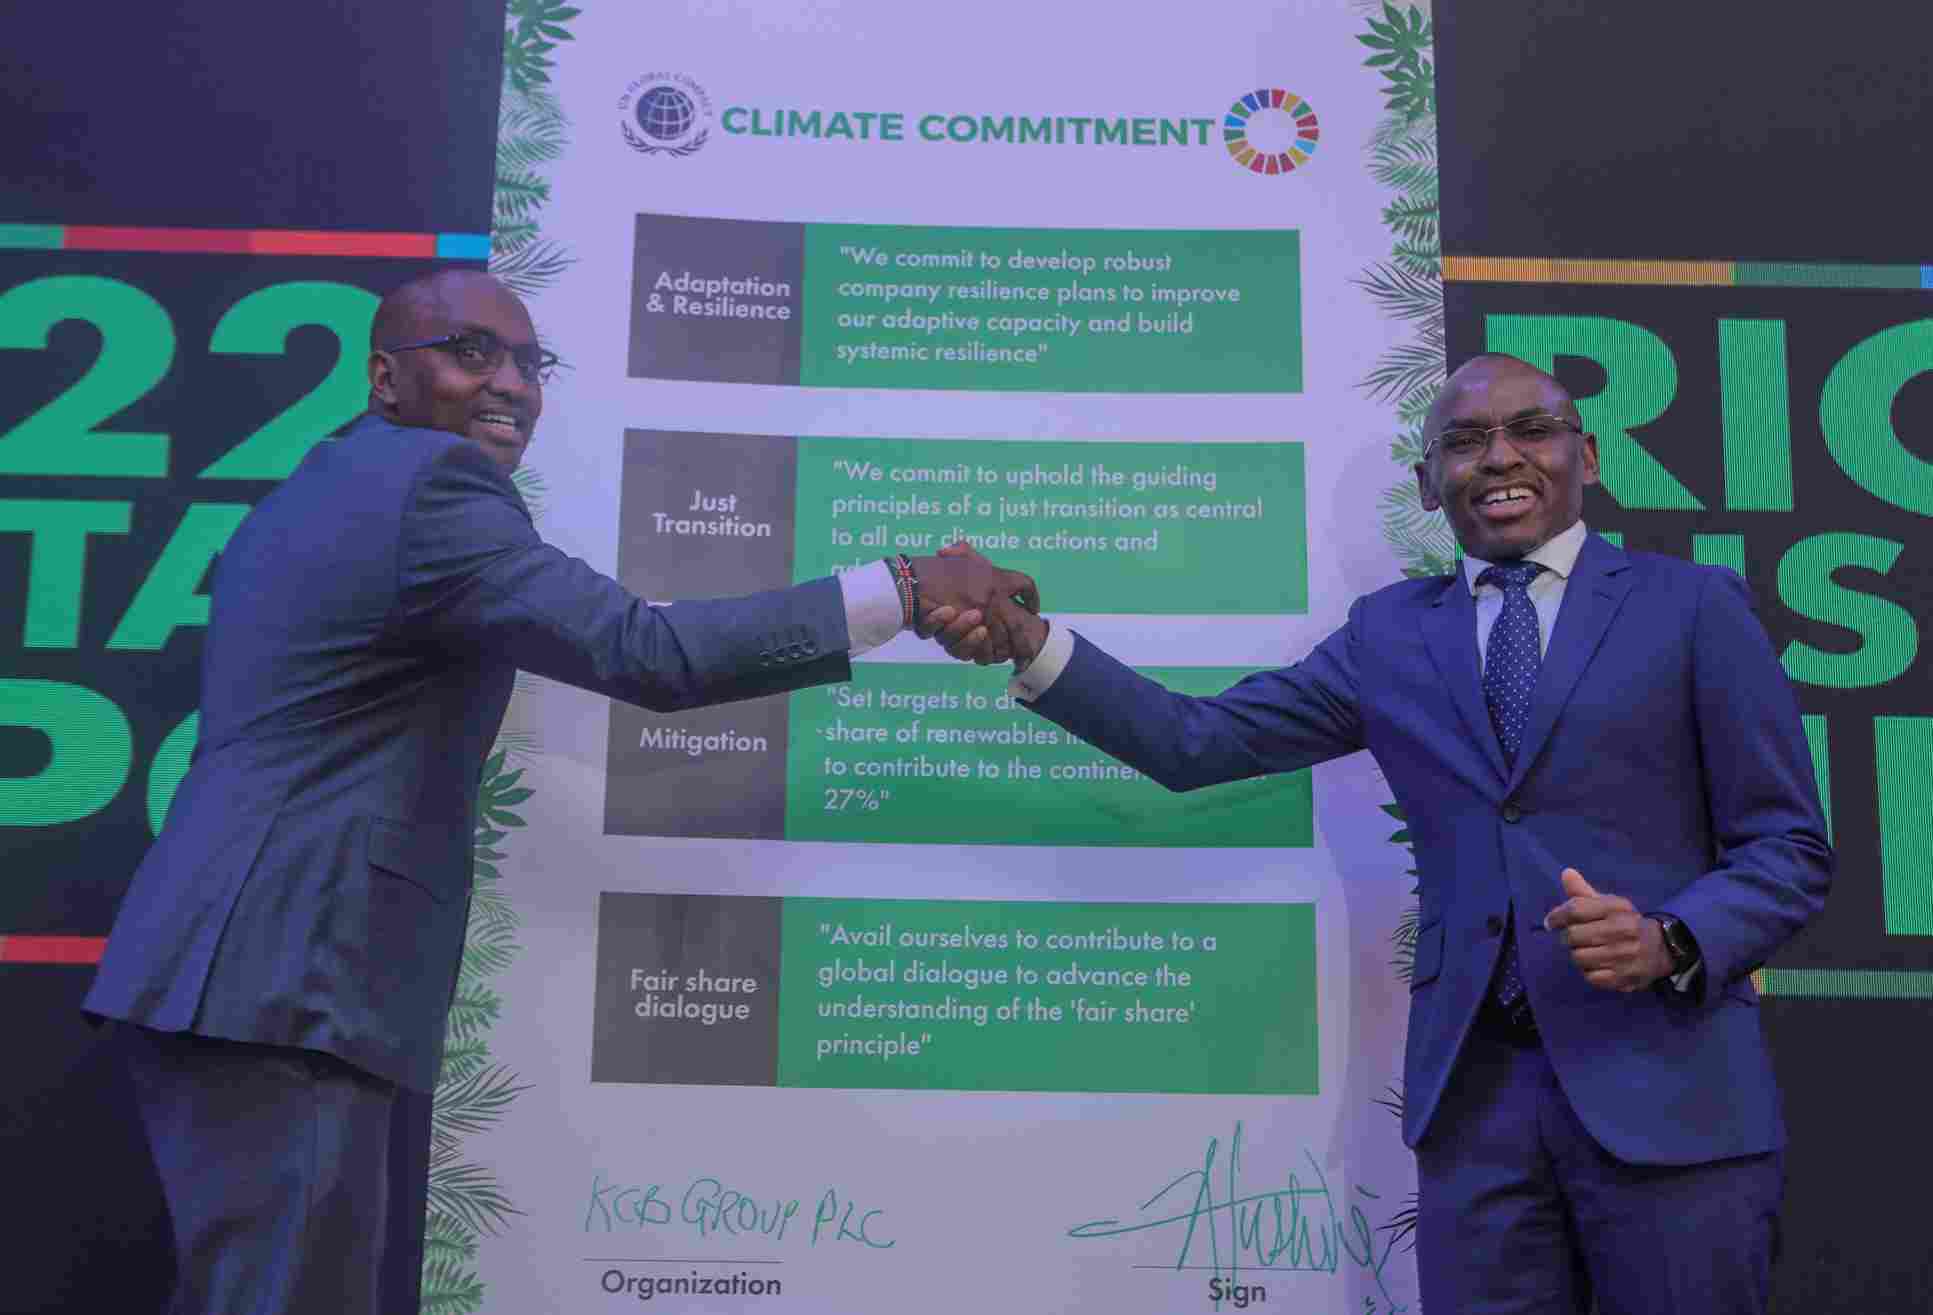 KCB Group CEO Paul Russo left with Safaricom PLC CEO Peter Ndegwa after signing the climate commitment act at the Michael Joseph Centre